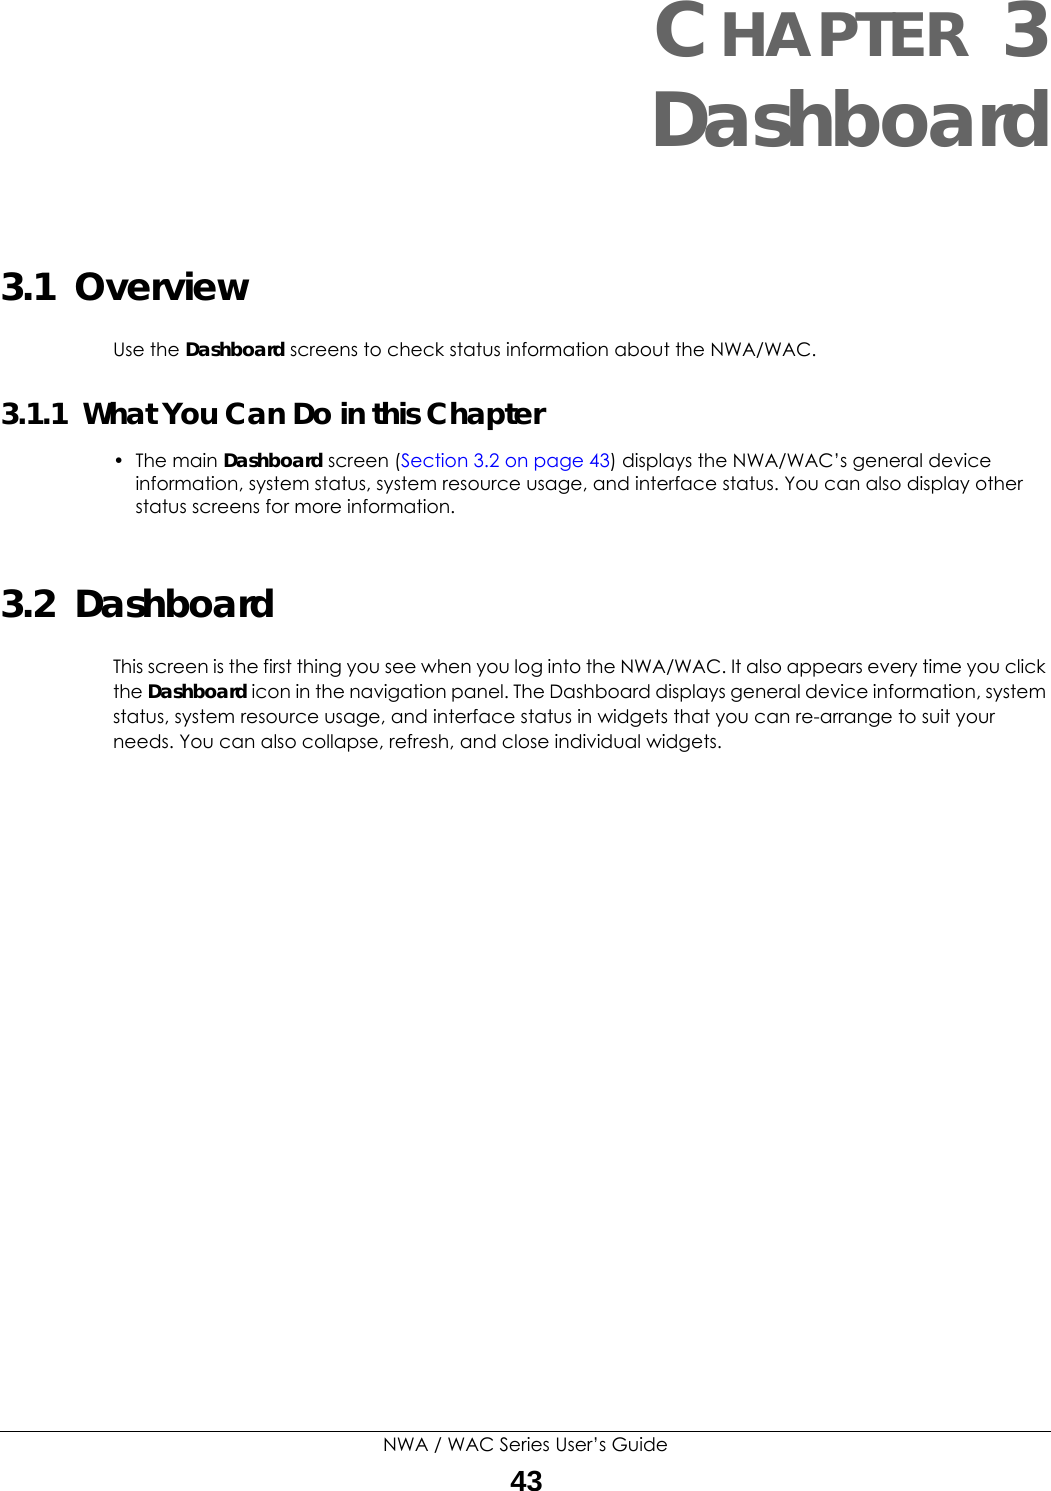 NWA / WAC Series User’s Guide43CHAPTER 3Dashboard3.1  OverviewUse the Dashboard screens to check status information about the NWA/WAC.3.1.1  What You Can Do in this Chapter• The main Dashboard screen (Section 3.2 on page 43) displays the NWA/WAC’s general device information, system status, system resource usage, and interface status. You can also display other status screens for more information.3.2  DashboardThis screen is the first thing you see when you log into the NWA/WAC. It also appears every time you click the Dashboard icon in the navigation panel. The Dashboard displays general device information, system status, system resource usage, and interface status in widgets that you can re-arrange to suit your needs. You can also collapse, refresh, and close individual widgets.